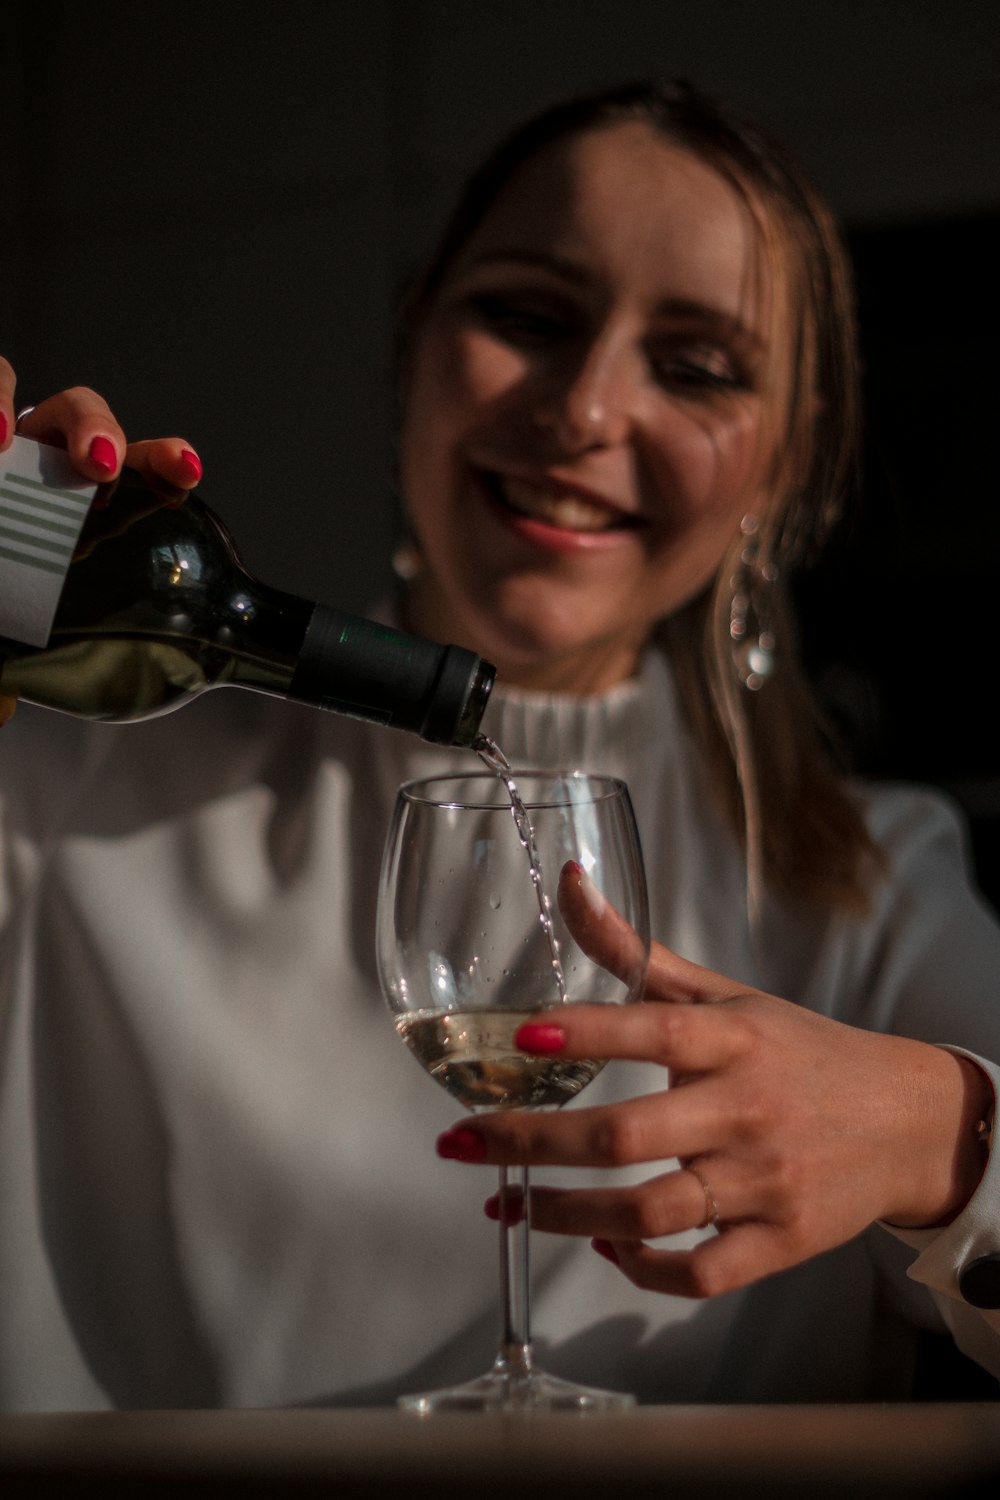 smiling woman holding wine bottle and wine glass